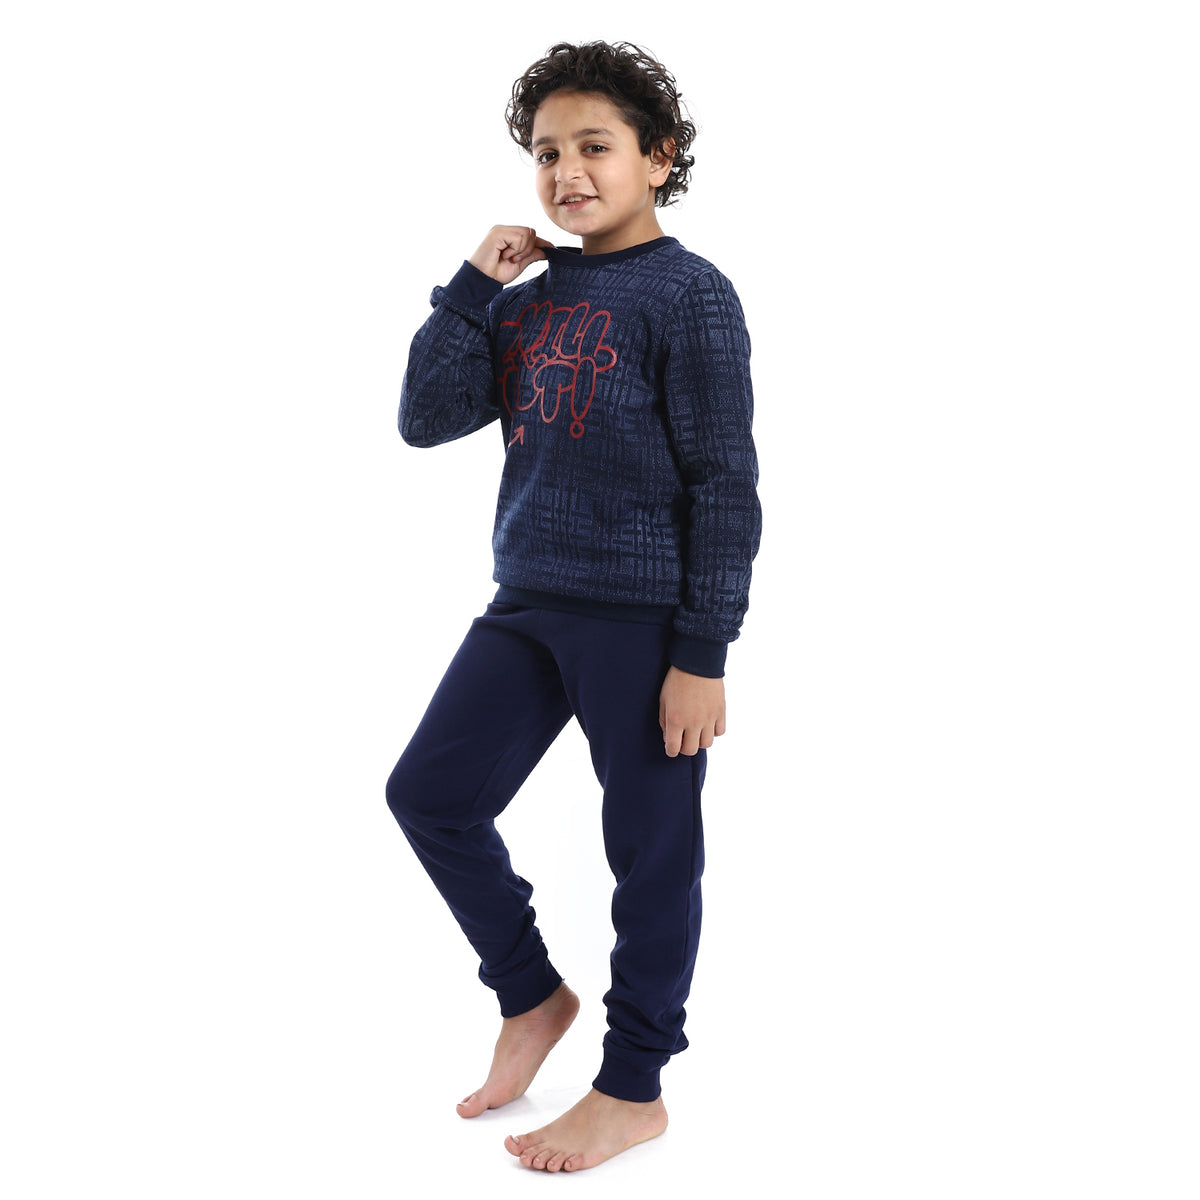 Boys' Winter Pajama Set - Cozy Printed Crew Neck Shirt and Navy Blue Pants - Perfect for Cold Nights